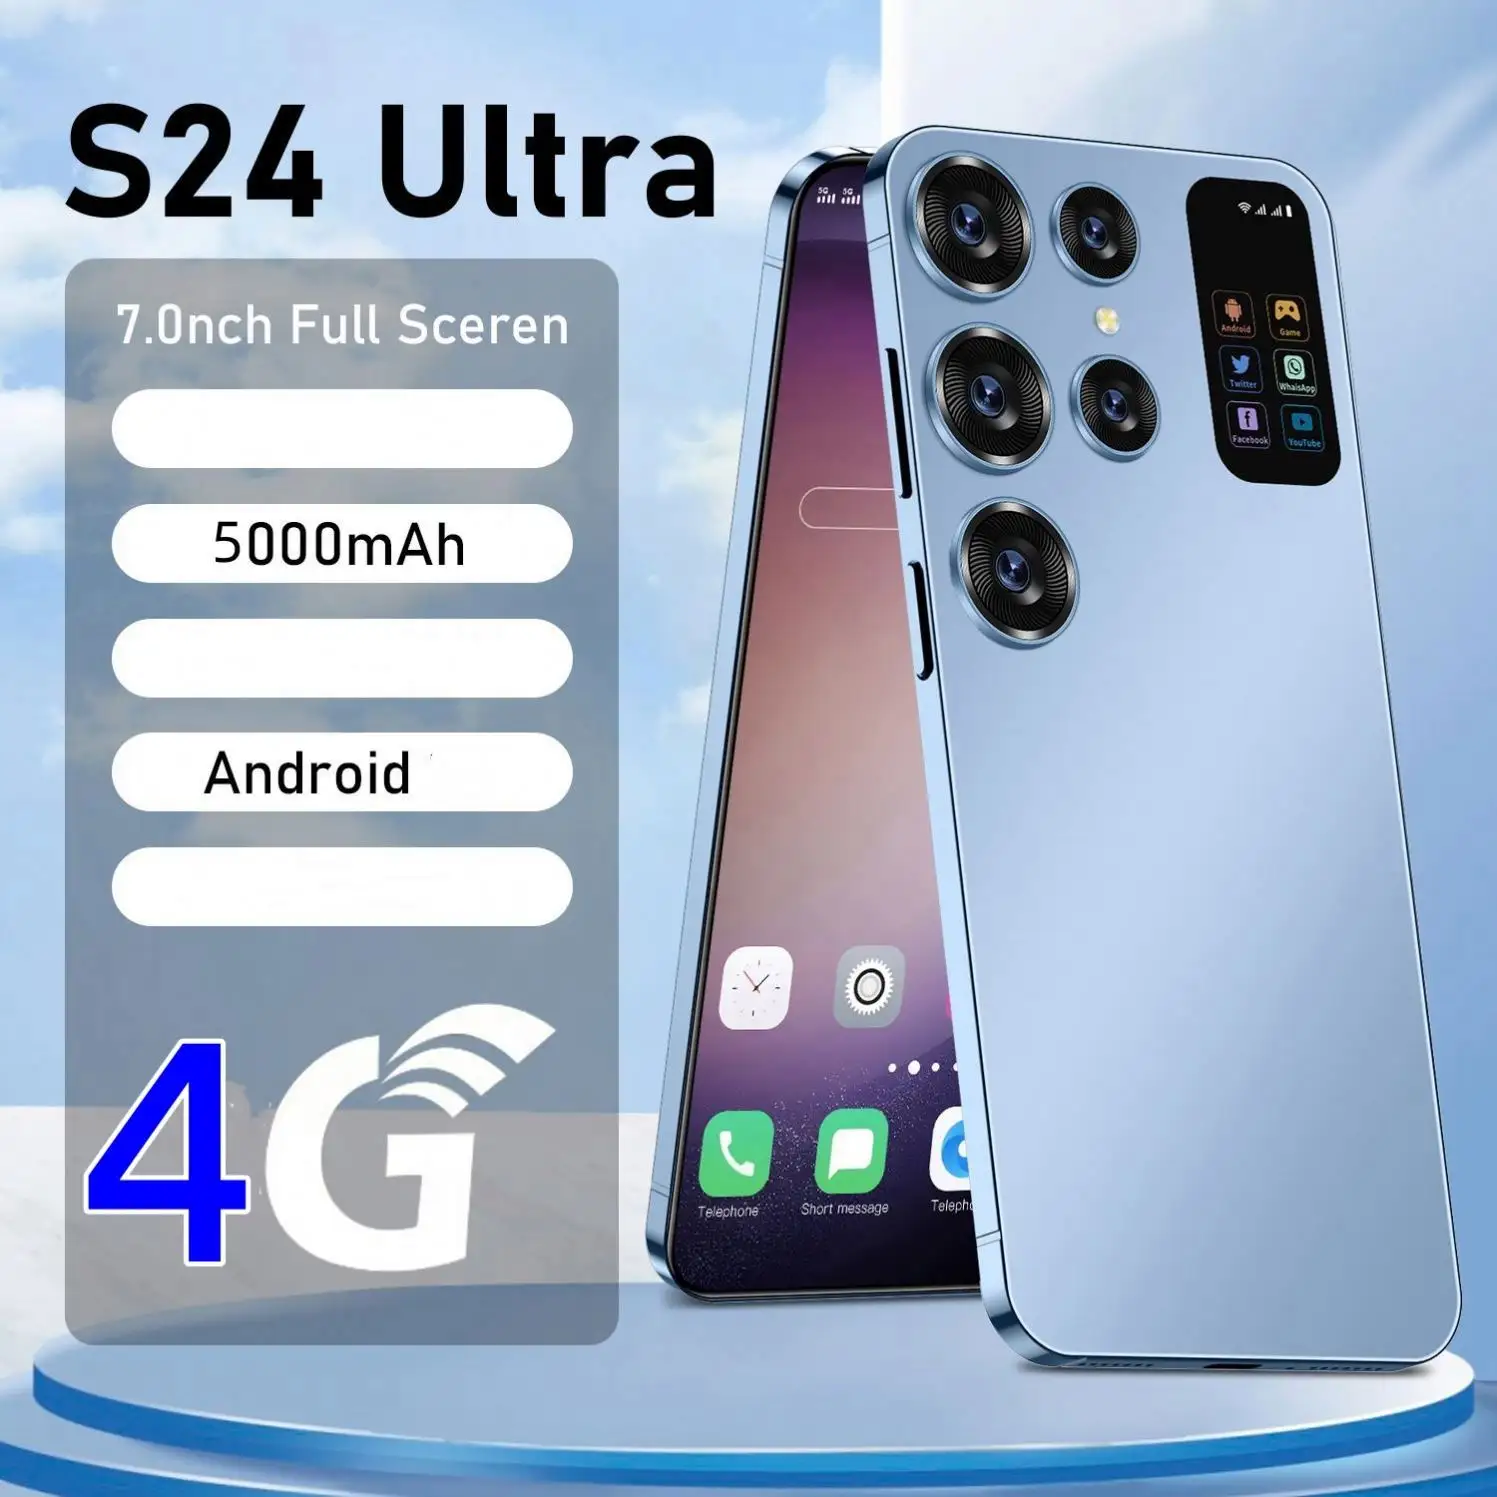 HIgh Smartphone 4G S24 Ultra 7.3 inch Full Screen Android 11 Mobile Phones Ture Storage 32GB/64GB/128GB s24 ultra phone